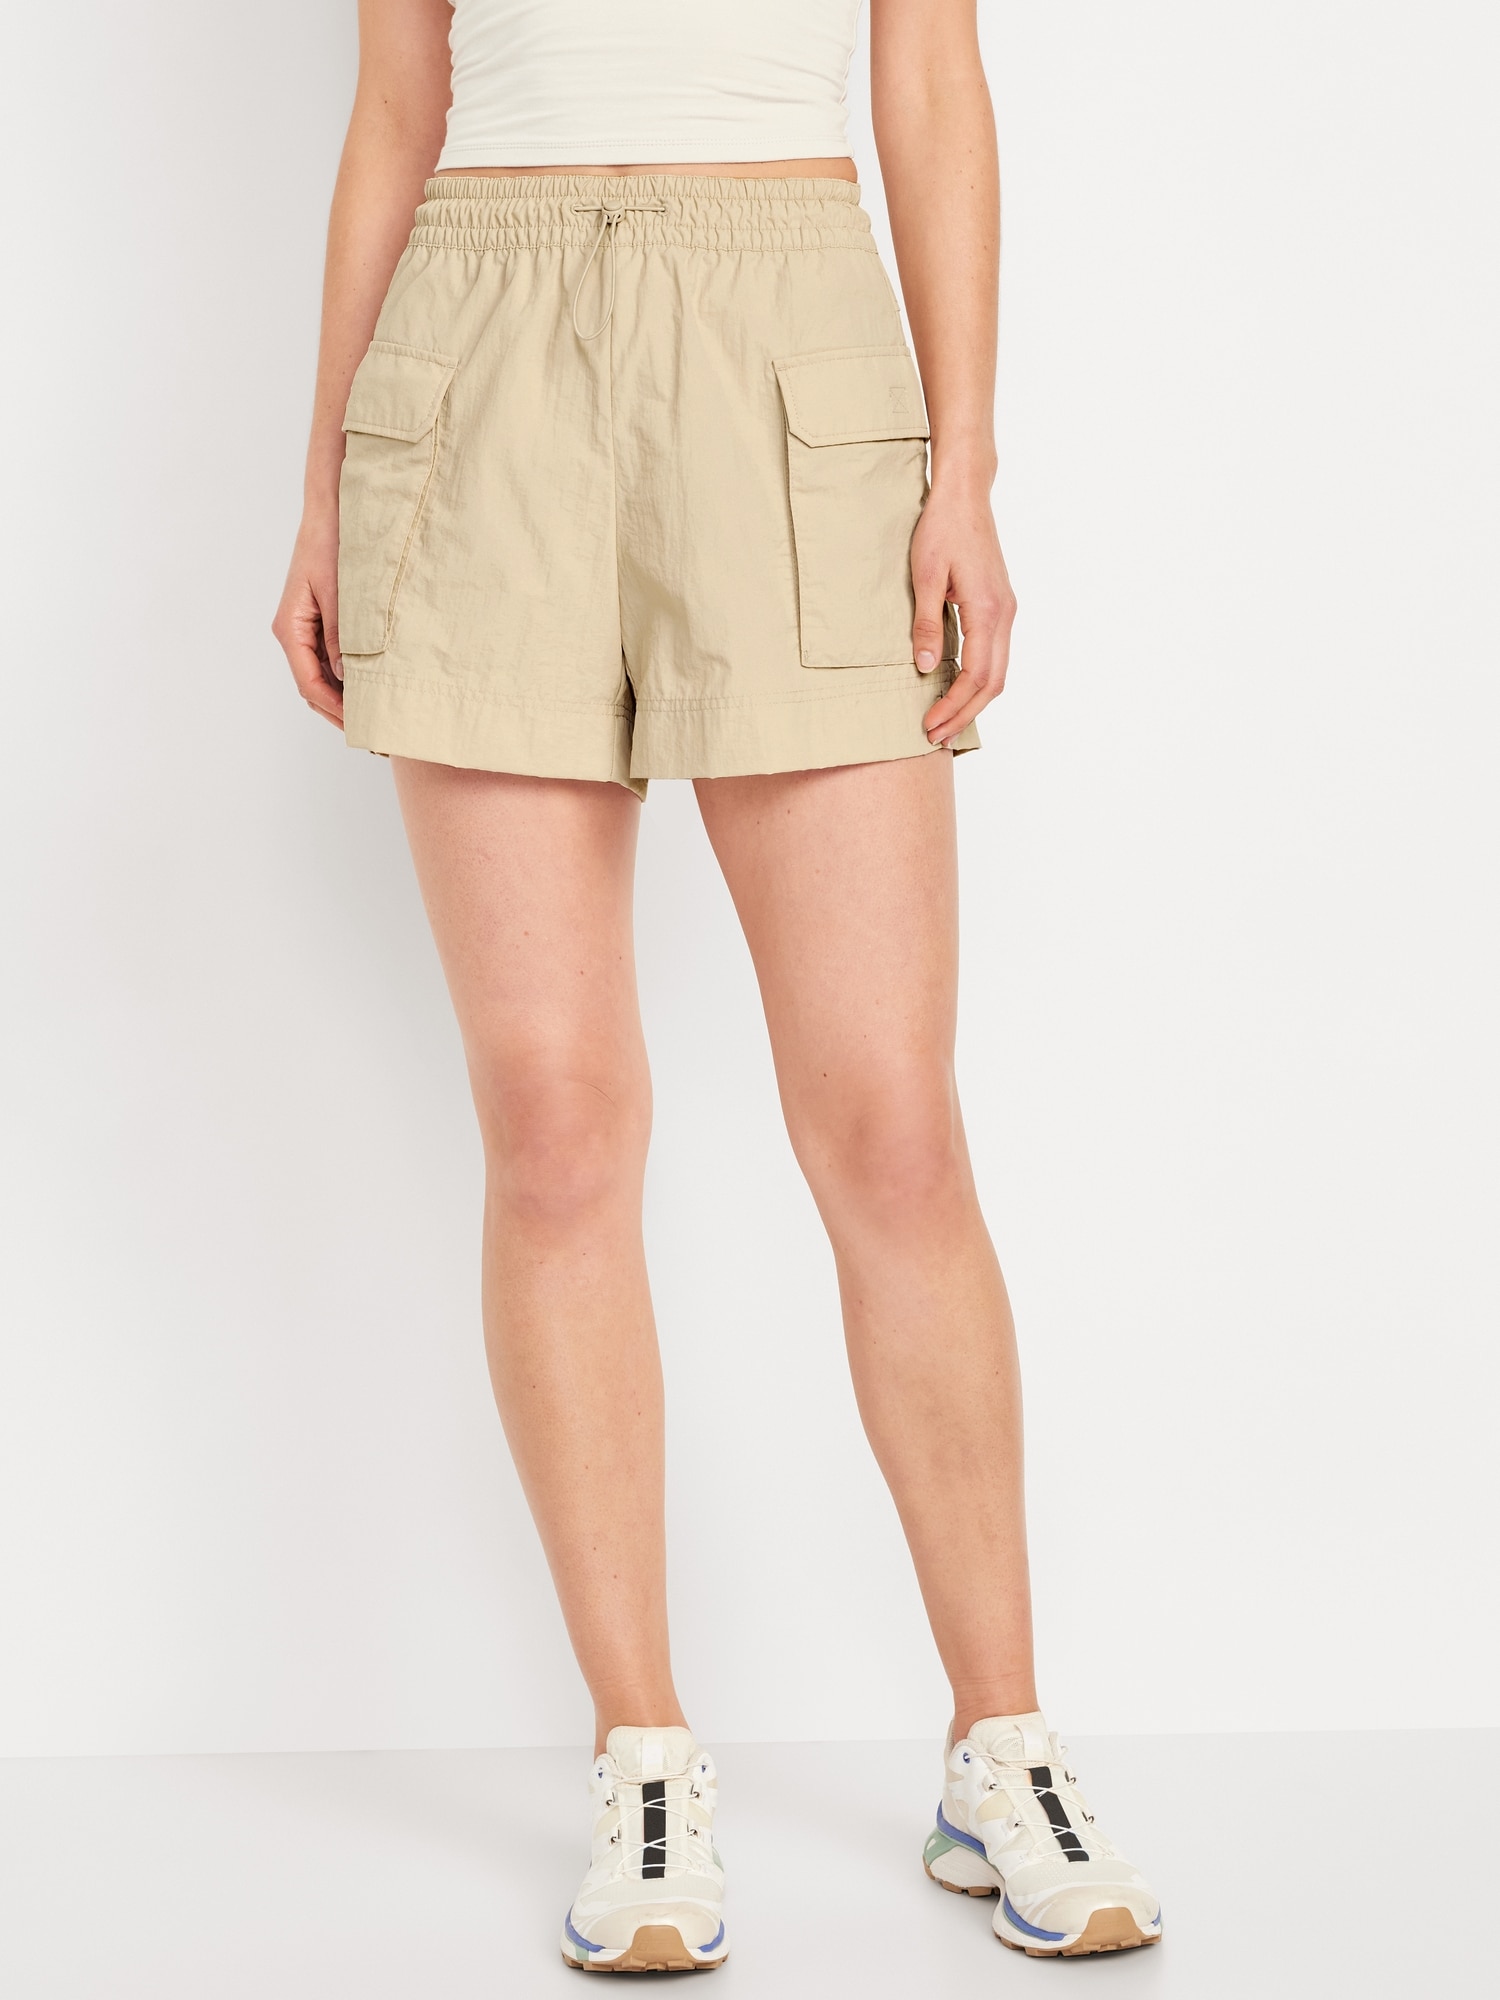 Comfortable High Waisted Cargo Ladies Cargo Shorts For Women Soft Cotton,  Elastic Waist, Perfect For Casual Summer Wear Style #230720 From Mu03,  $15.35